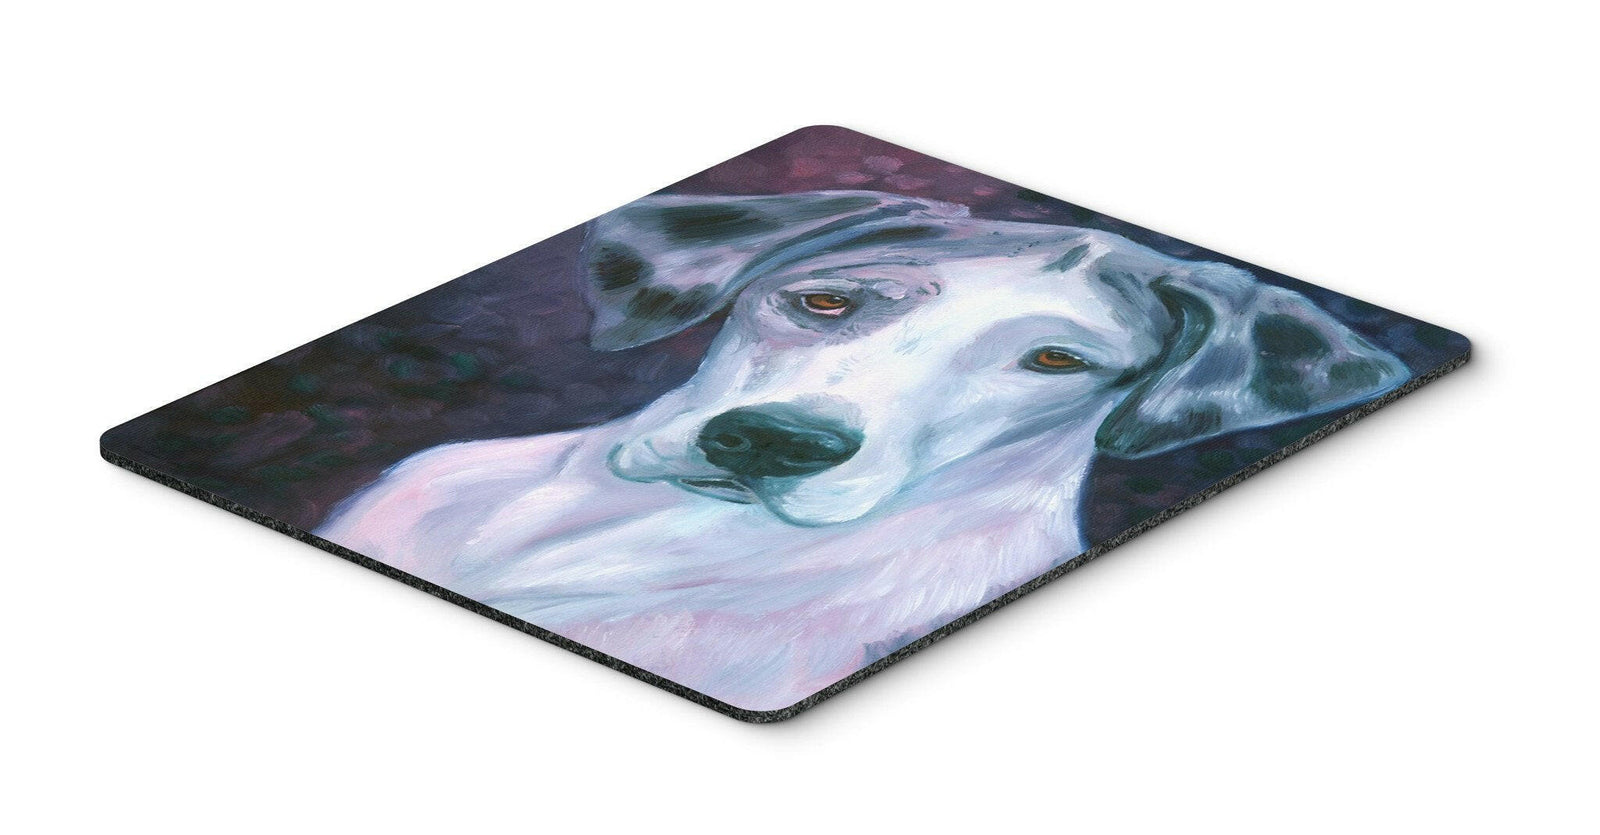 Curious Great Dane Mouse Pad, Hot Pad or Trivet 7441MP by Caroline's Treasures